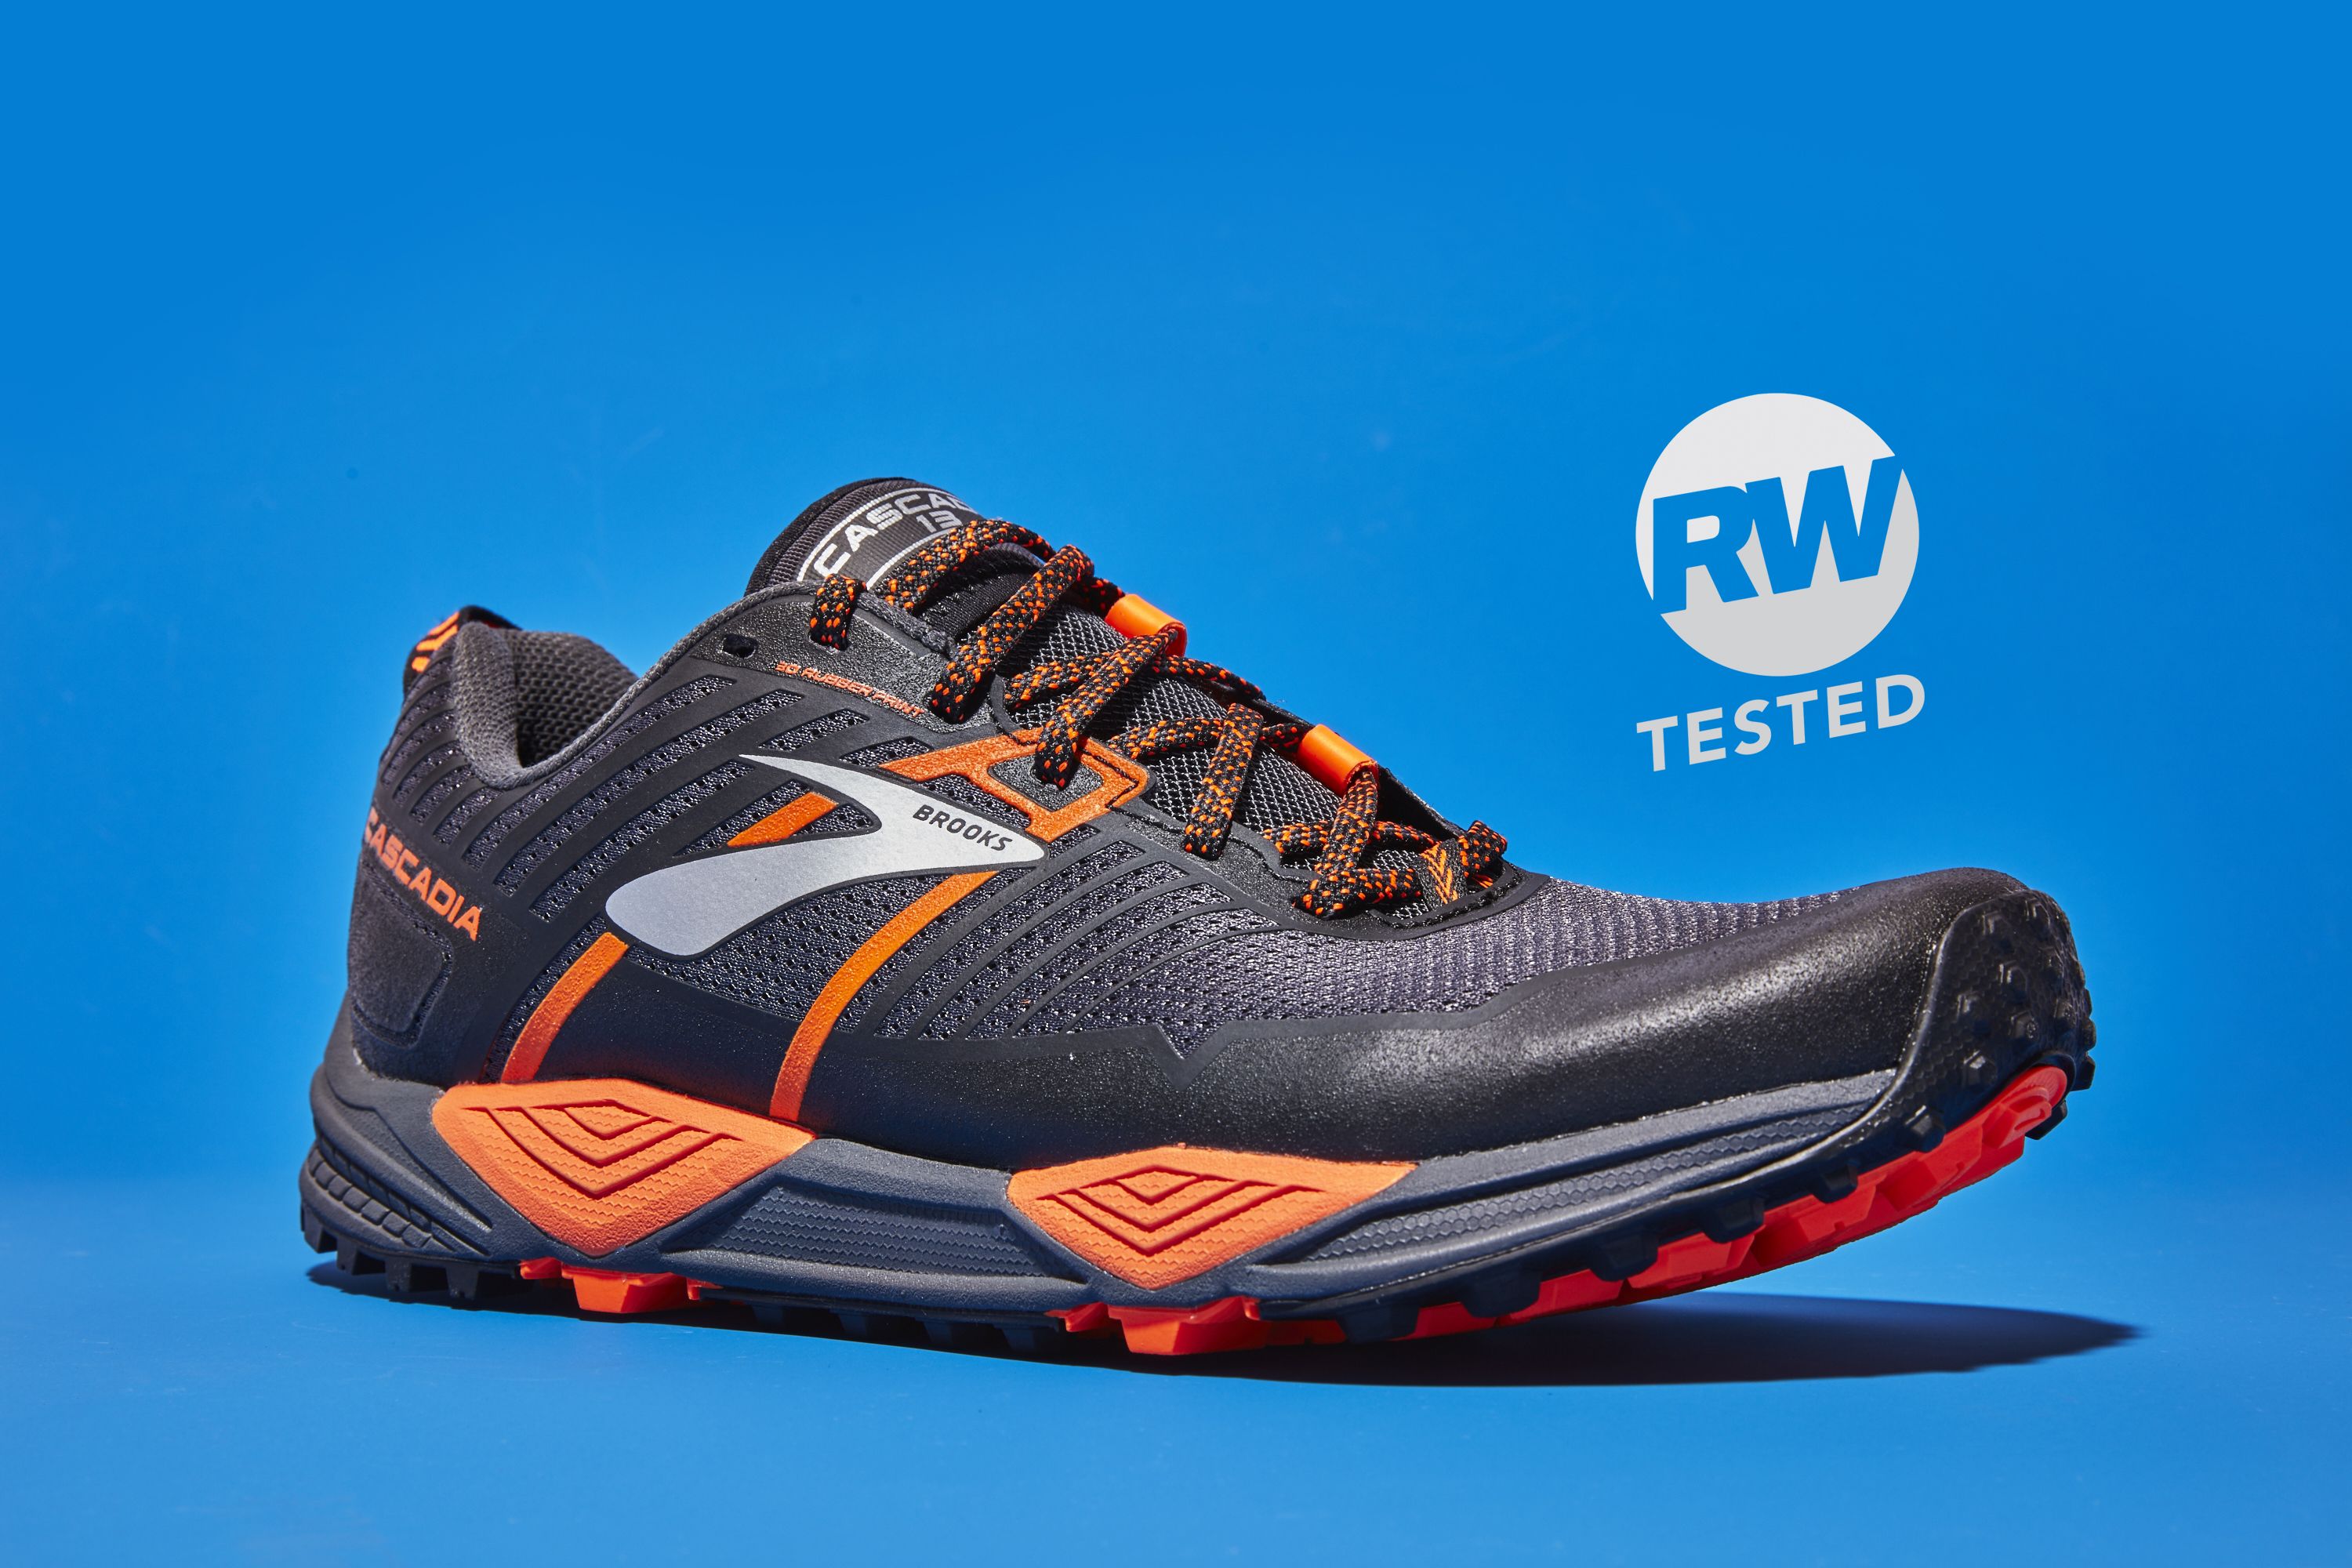 Brooks Cascadia 14 Best Trail Running Shoes 2019 | lupon.gov.ph